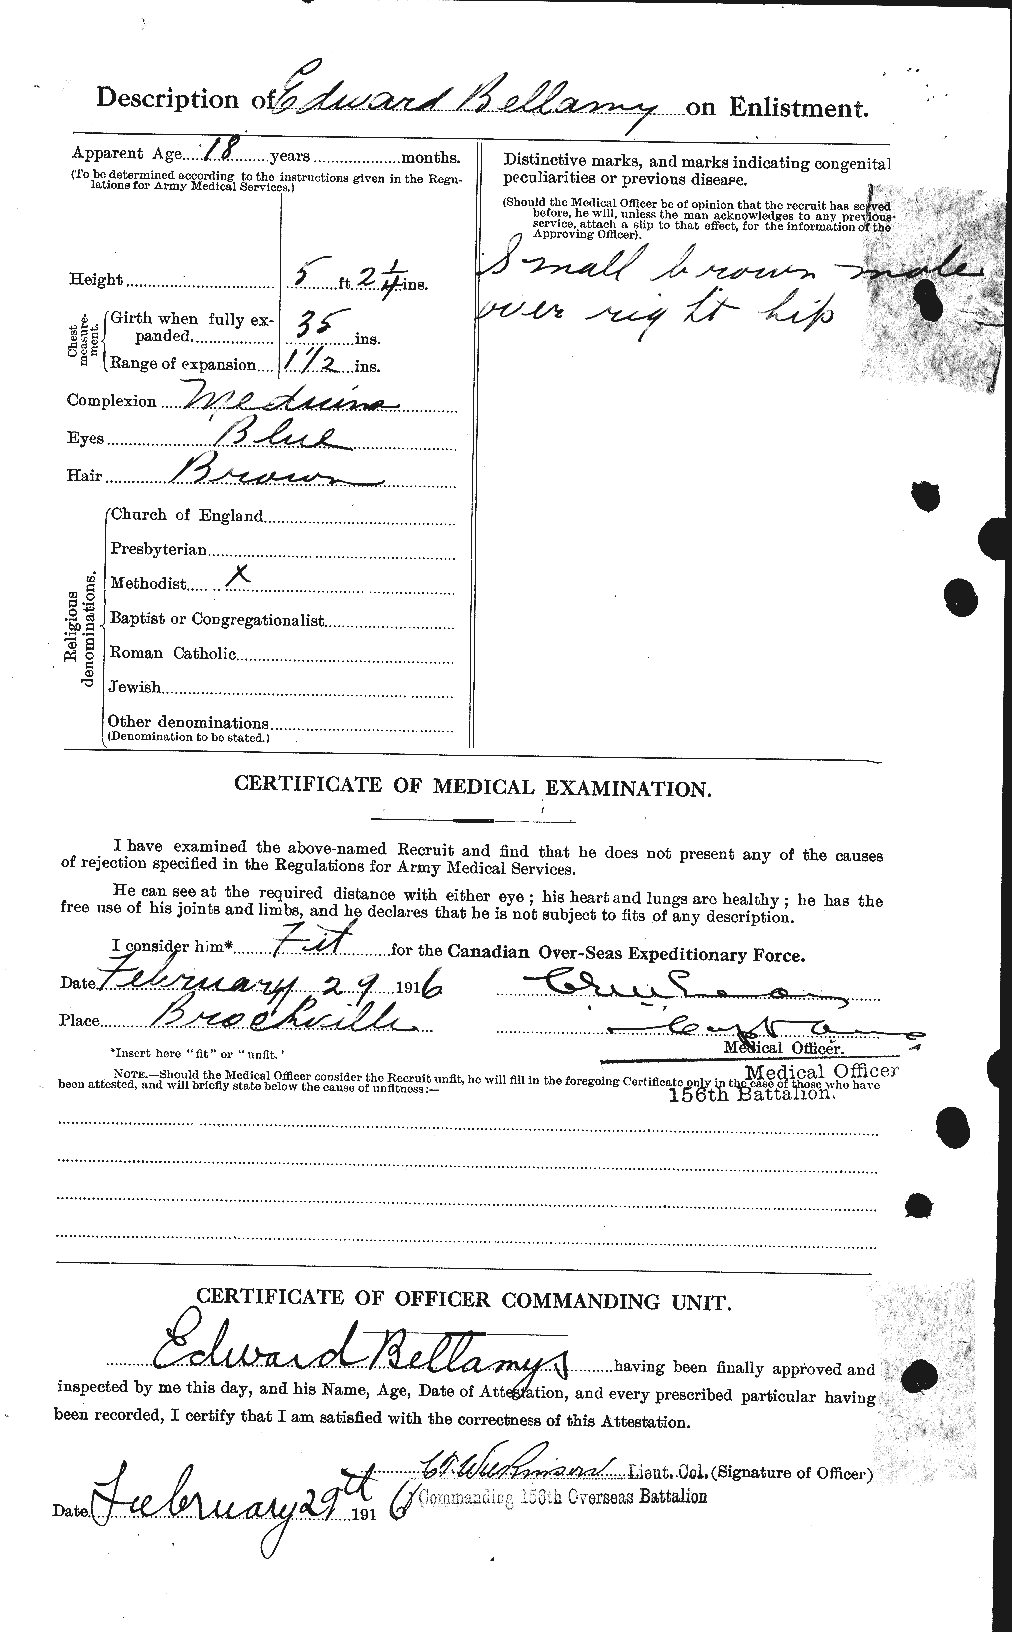 Personnel Records of the First World War - CEF 234970b